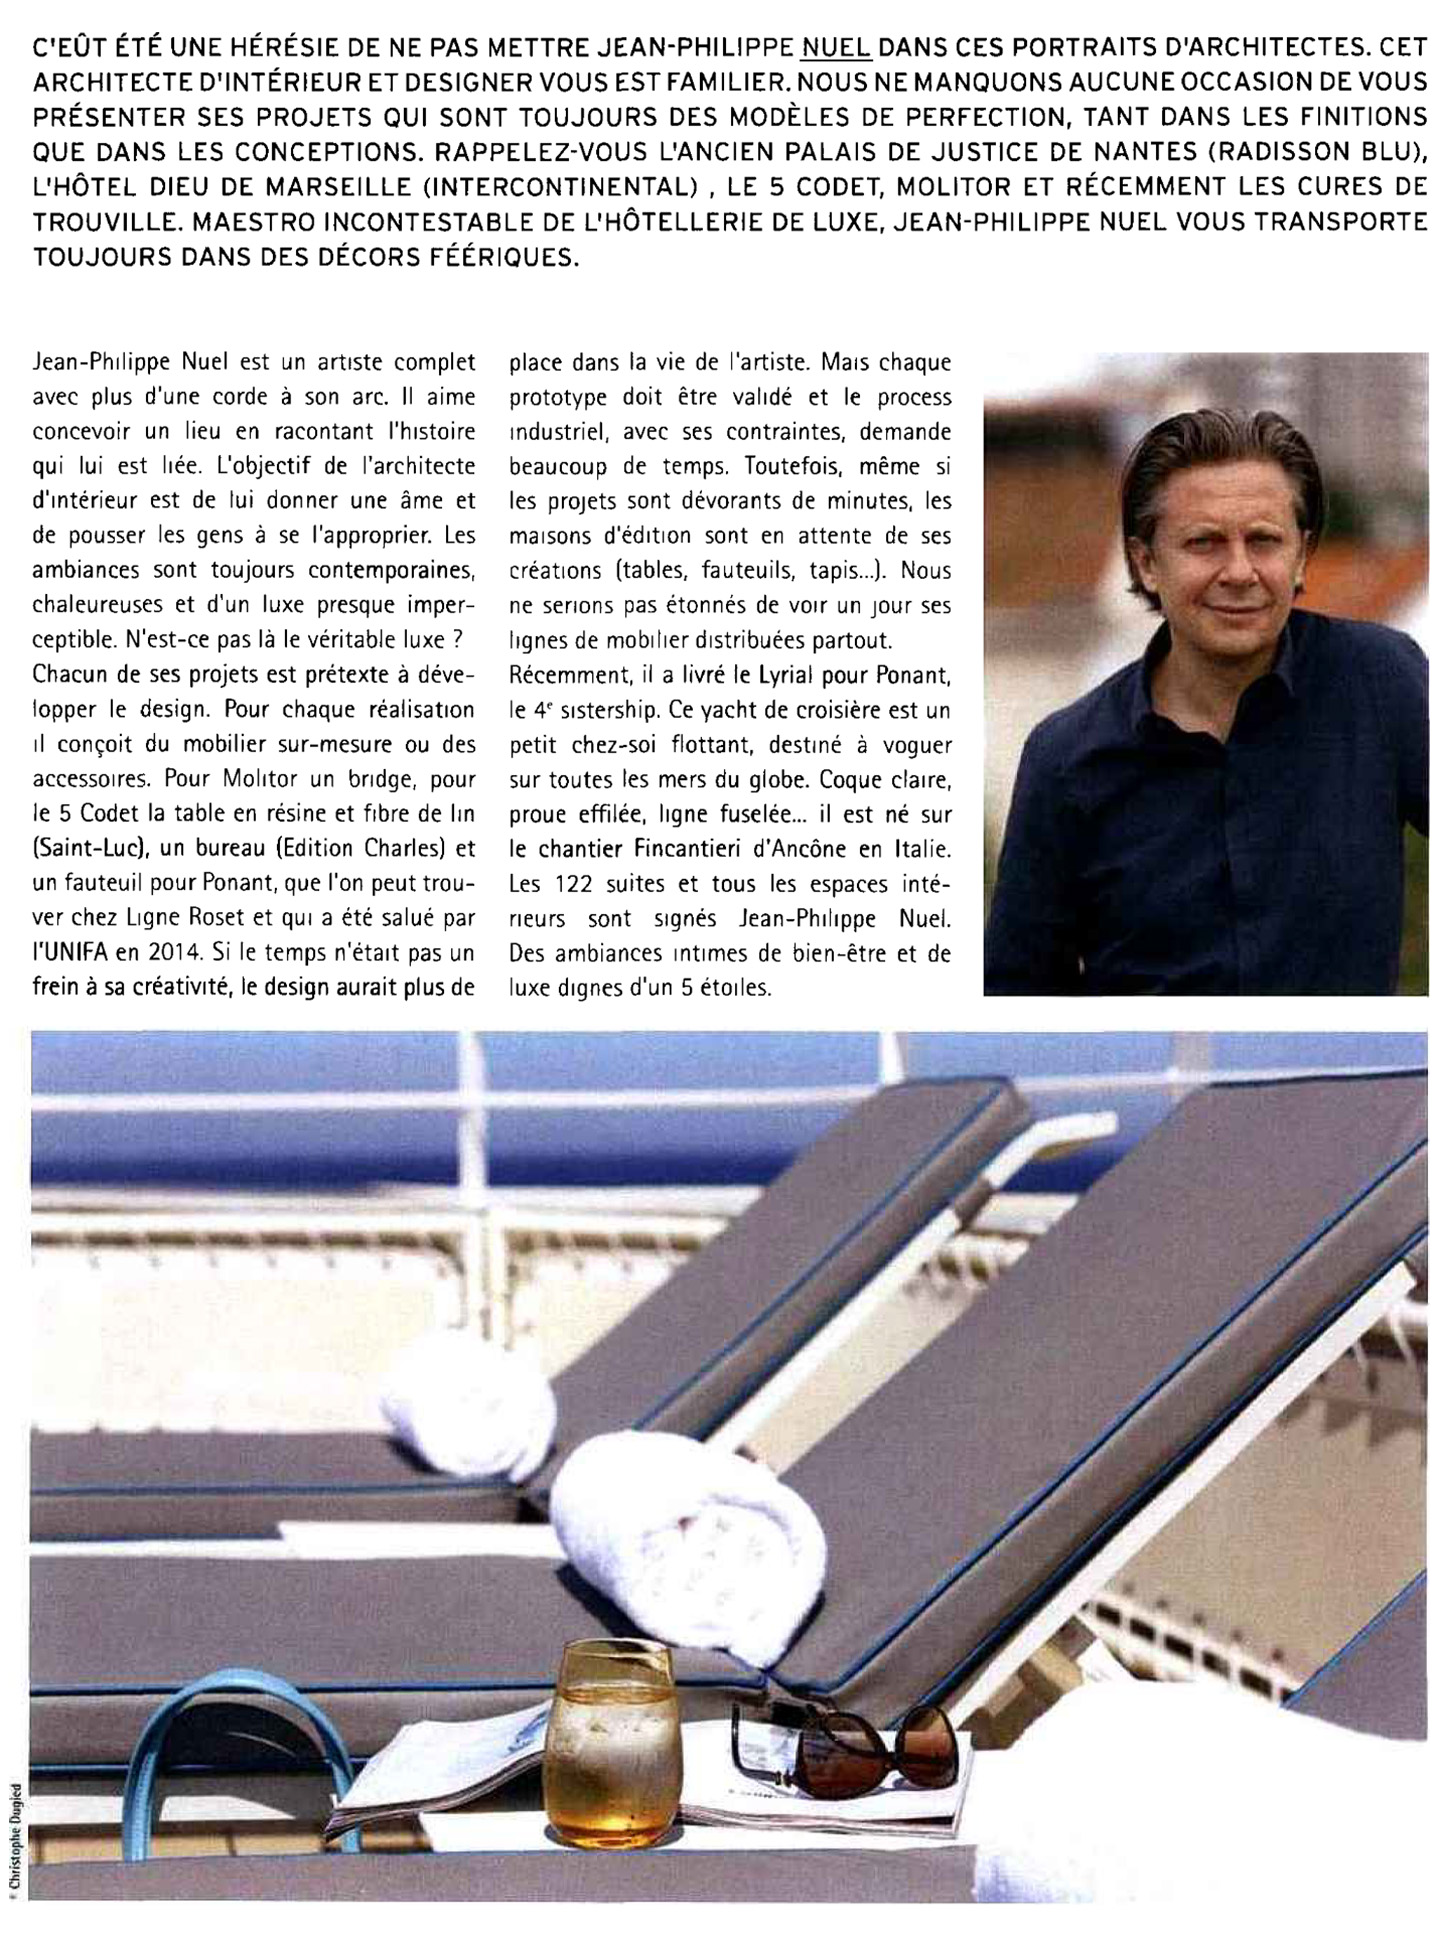 article on the lyrial in nda magazine, luxury cruise ship of the ponant company from the sistership fleet designed by the interior design studio jean-philippe nuel